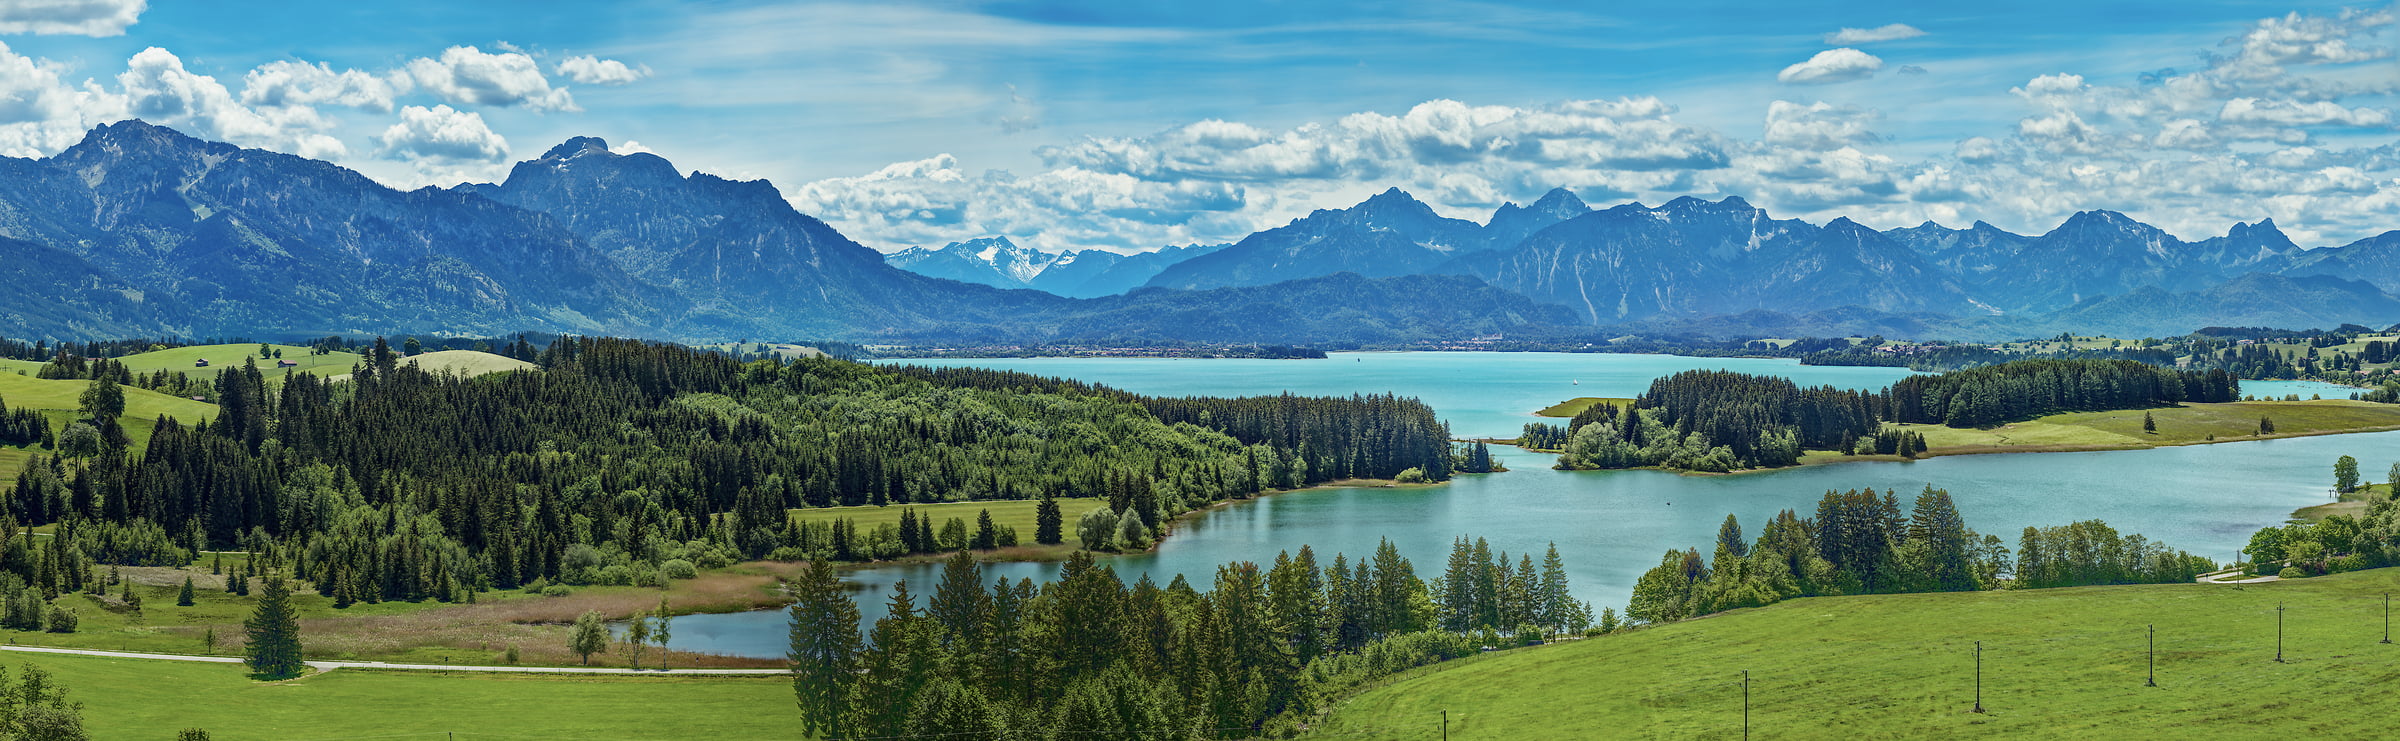 2,255 megapixels! A very high resolution, large-format VAST photo print of a Germany landscape with lakes, mountains, and a beautiful sky; photograph created by Alfred Feil at Ilas Mountain Lake, Allgaeu Alps, Bavaria, Germany